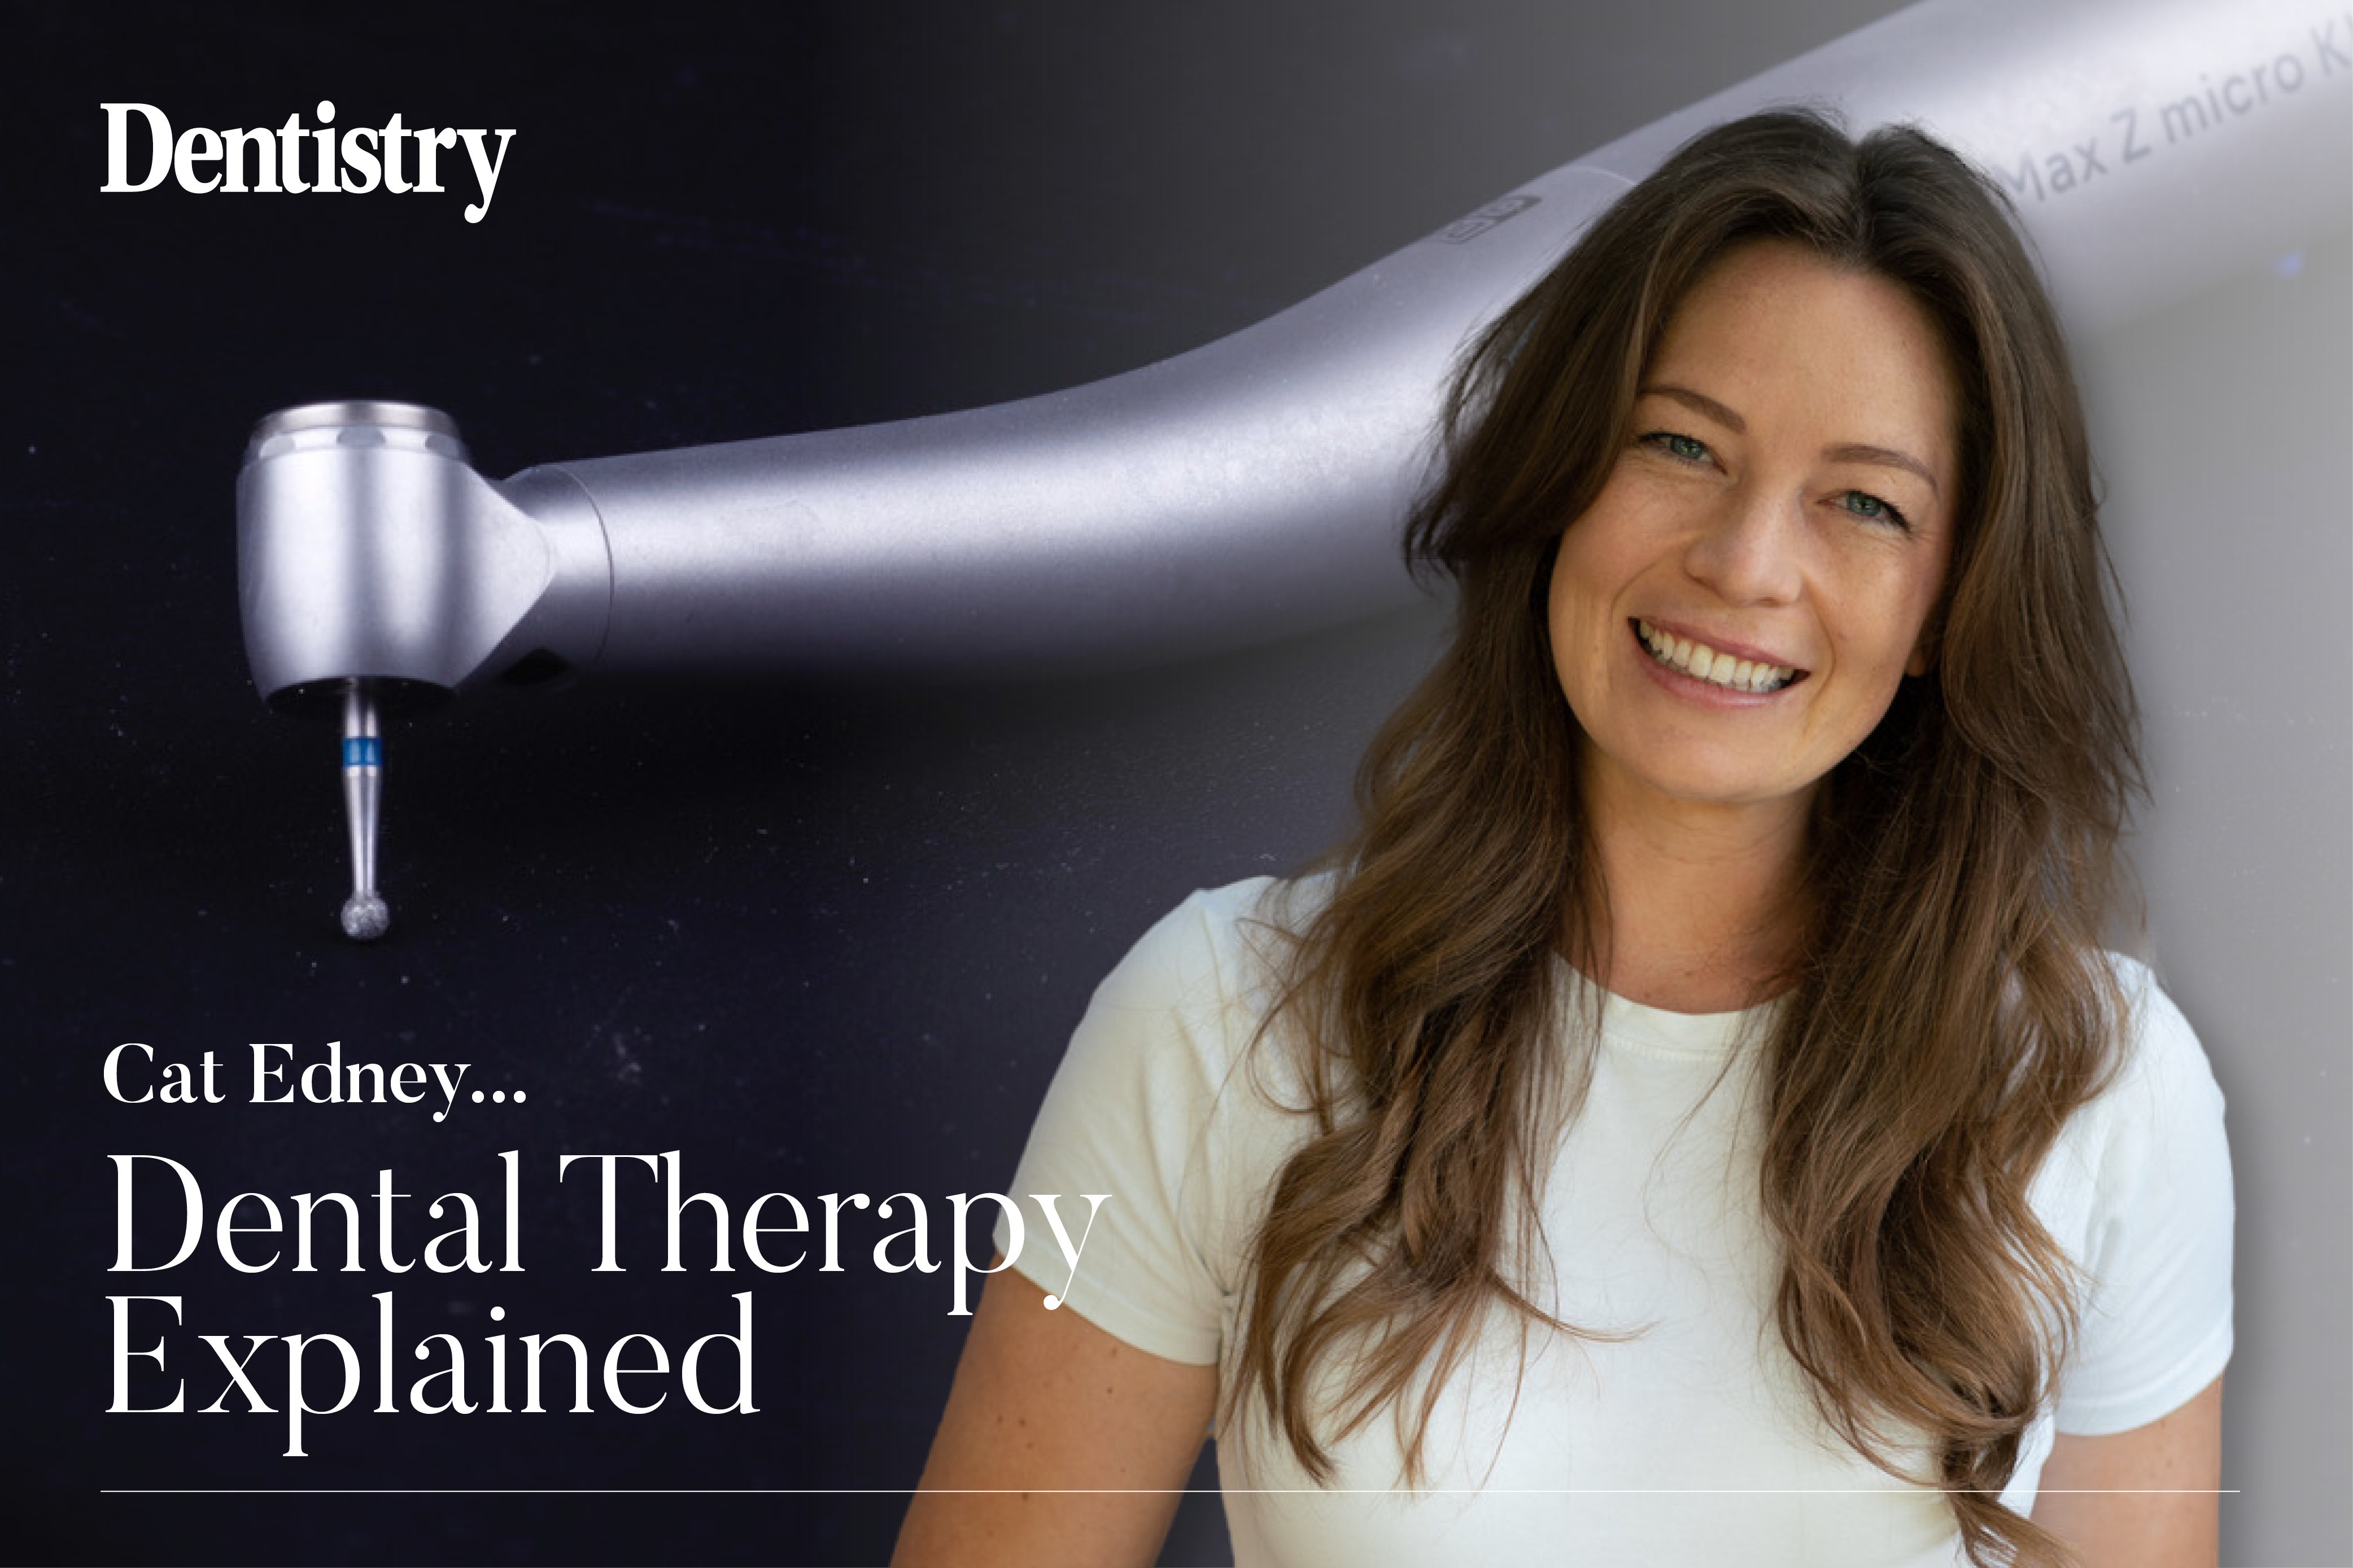 Cat Edney explores the key concepts that should be considered when employing a dental therapist in your practice – recruitment, renumeration and retention.